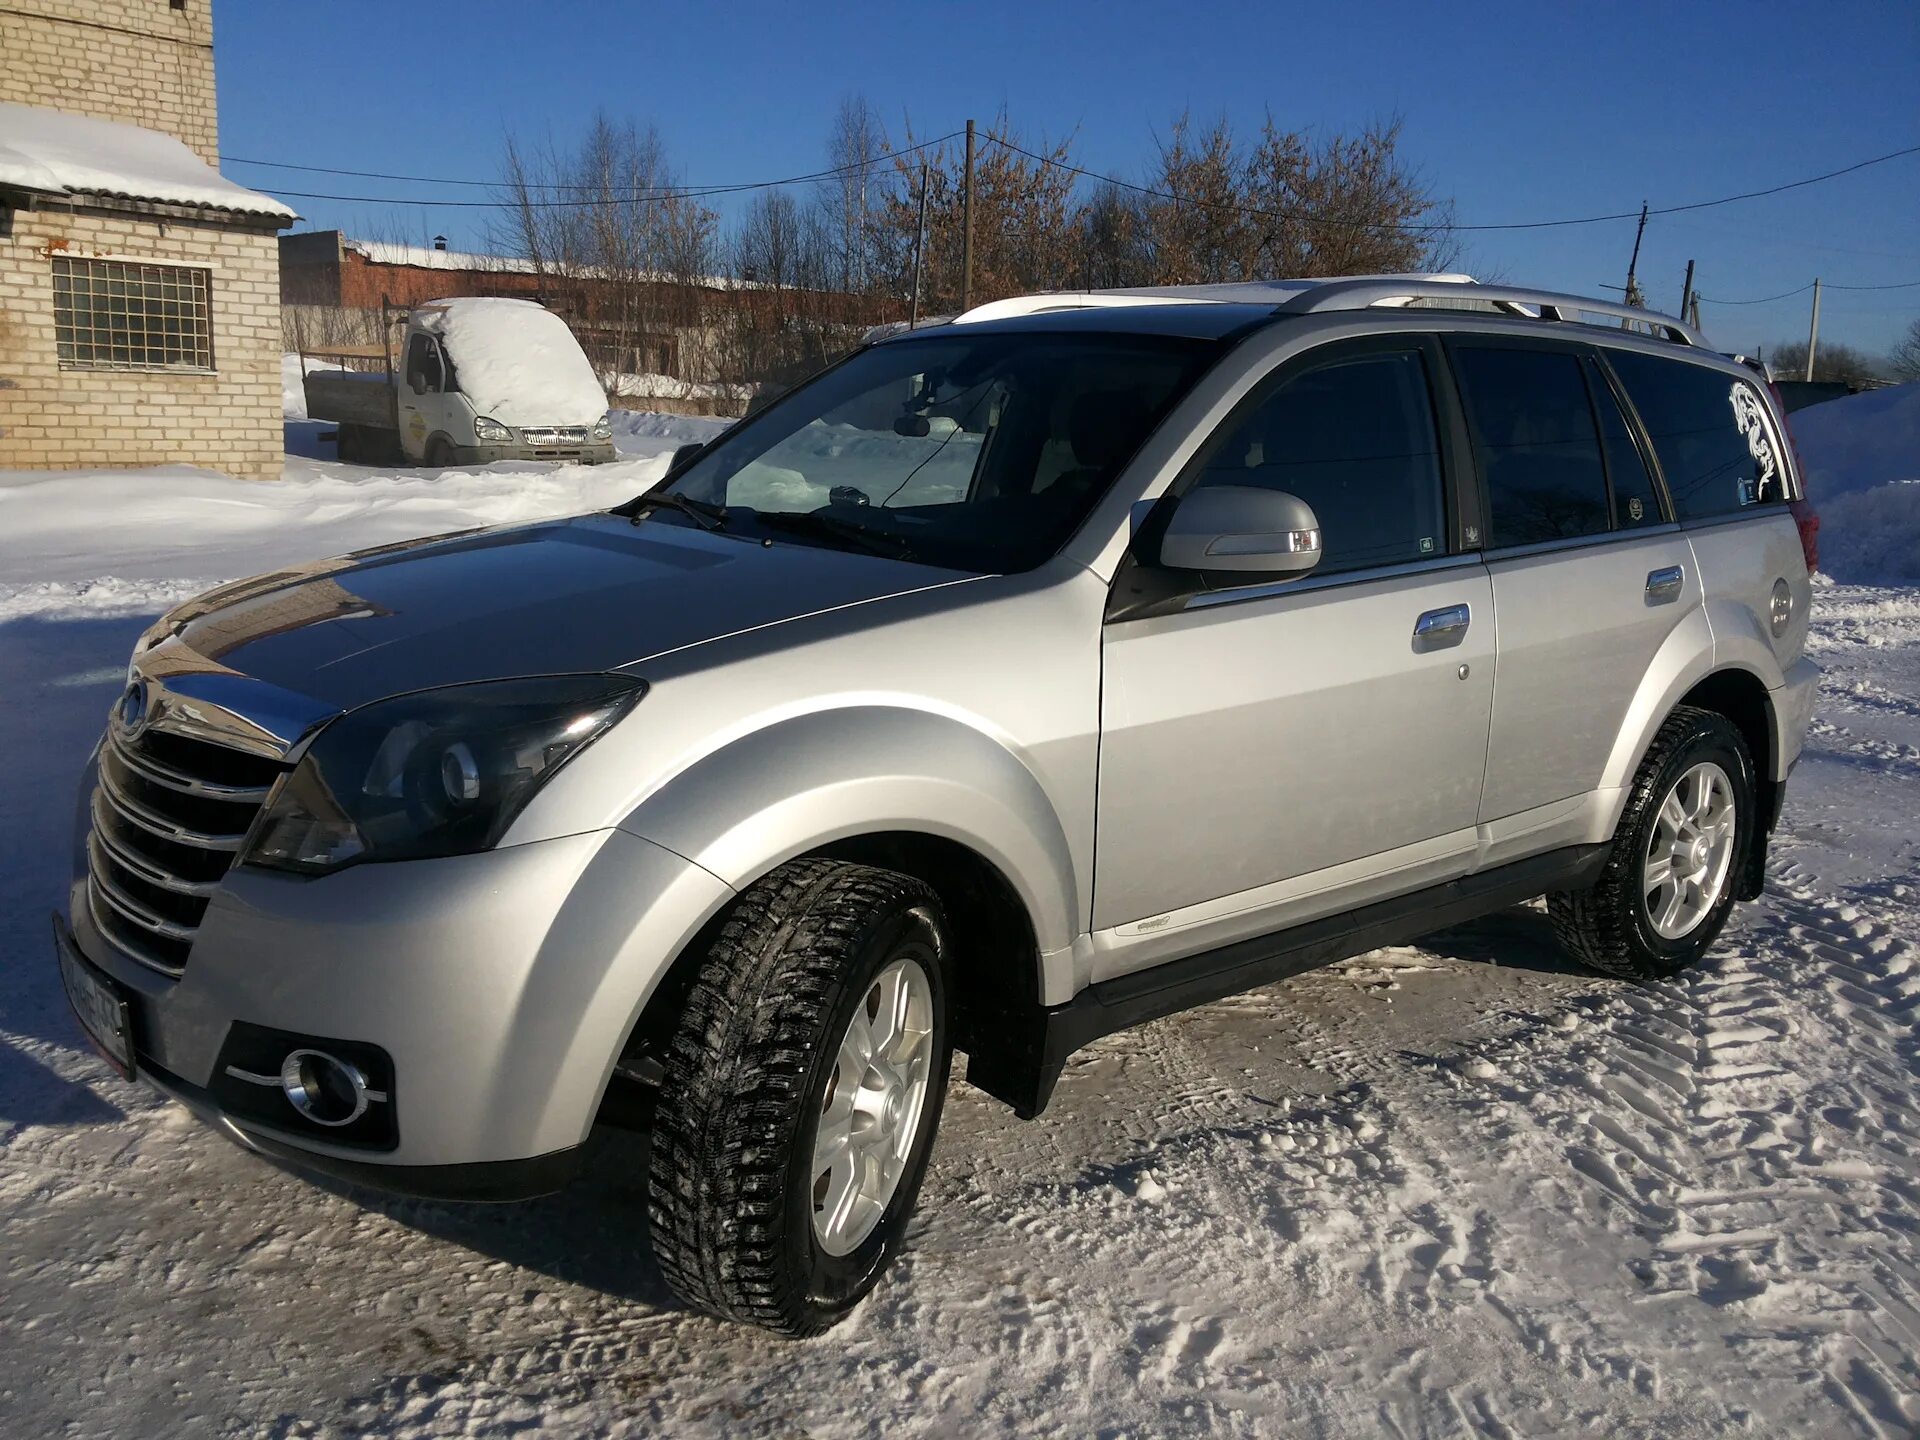 Great Wall Hover 2014. Great Wall, 2014г.. Грейт вол Ховер 2014 авто ру. Great Wall Hover 97 Россия.